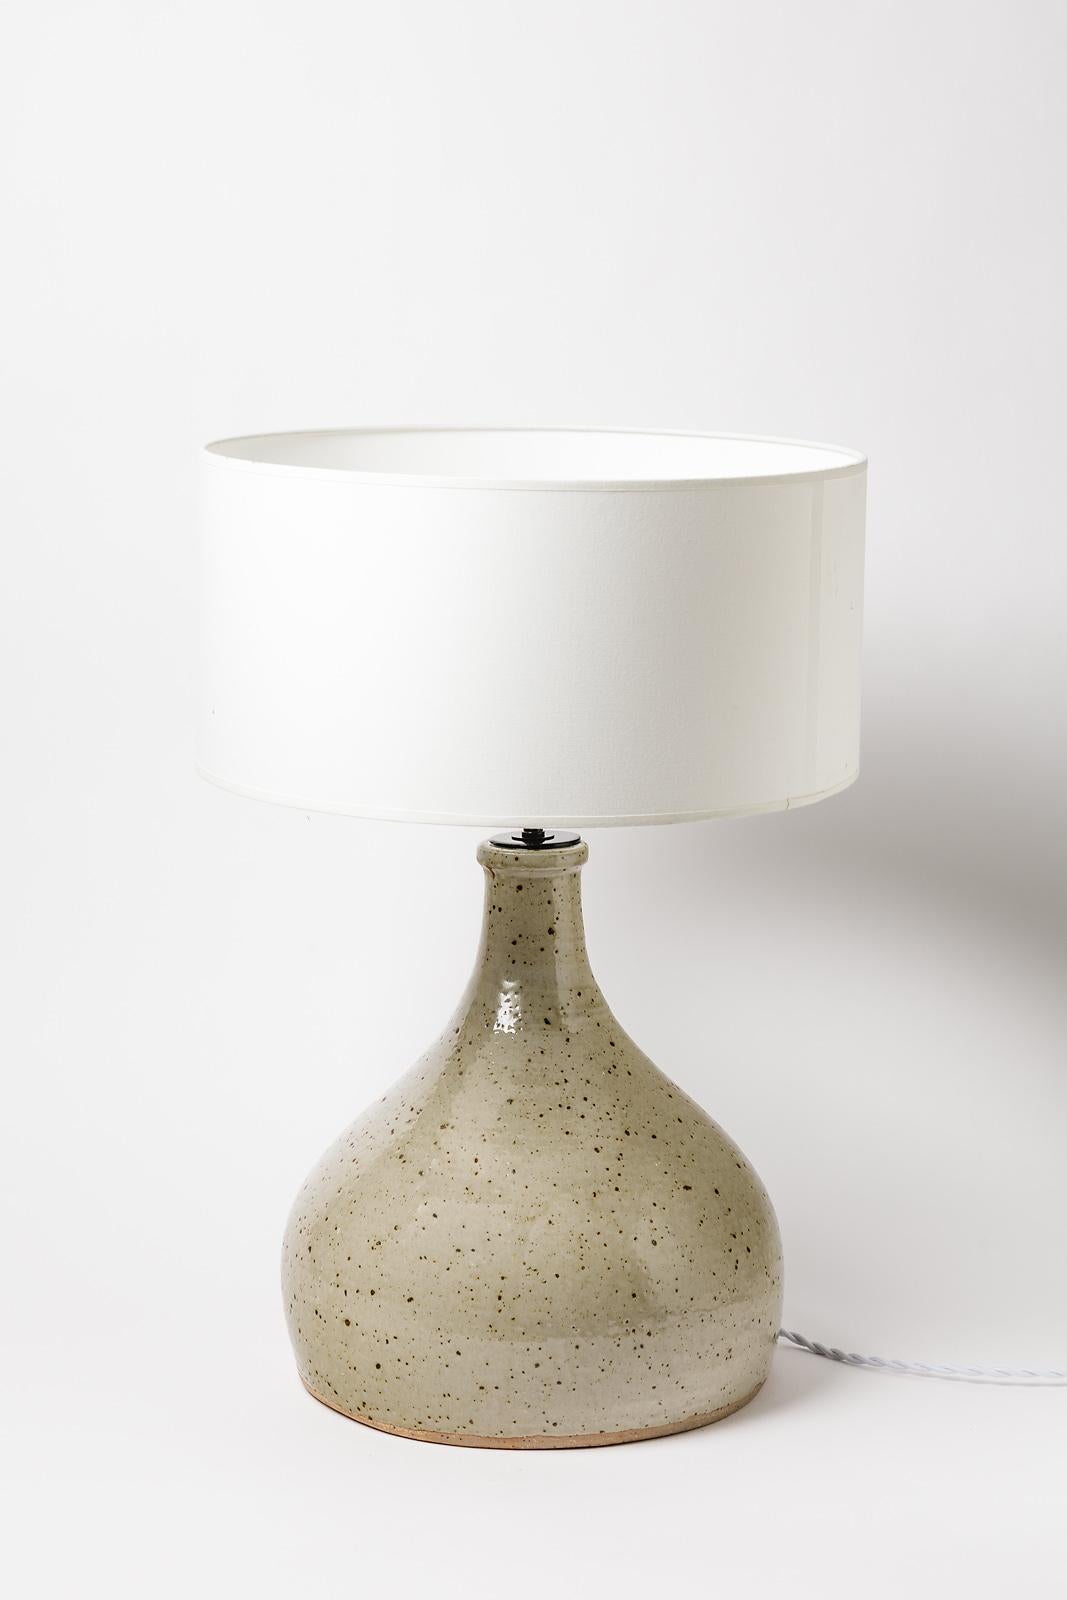 French Large grey handmade stoneware ceramic table lamp by Migeon La Borne 1979  For Sale